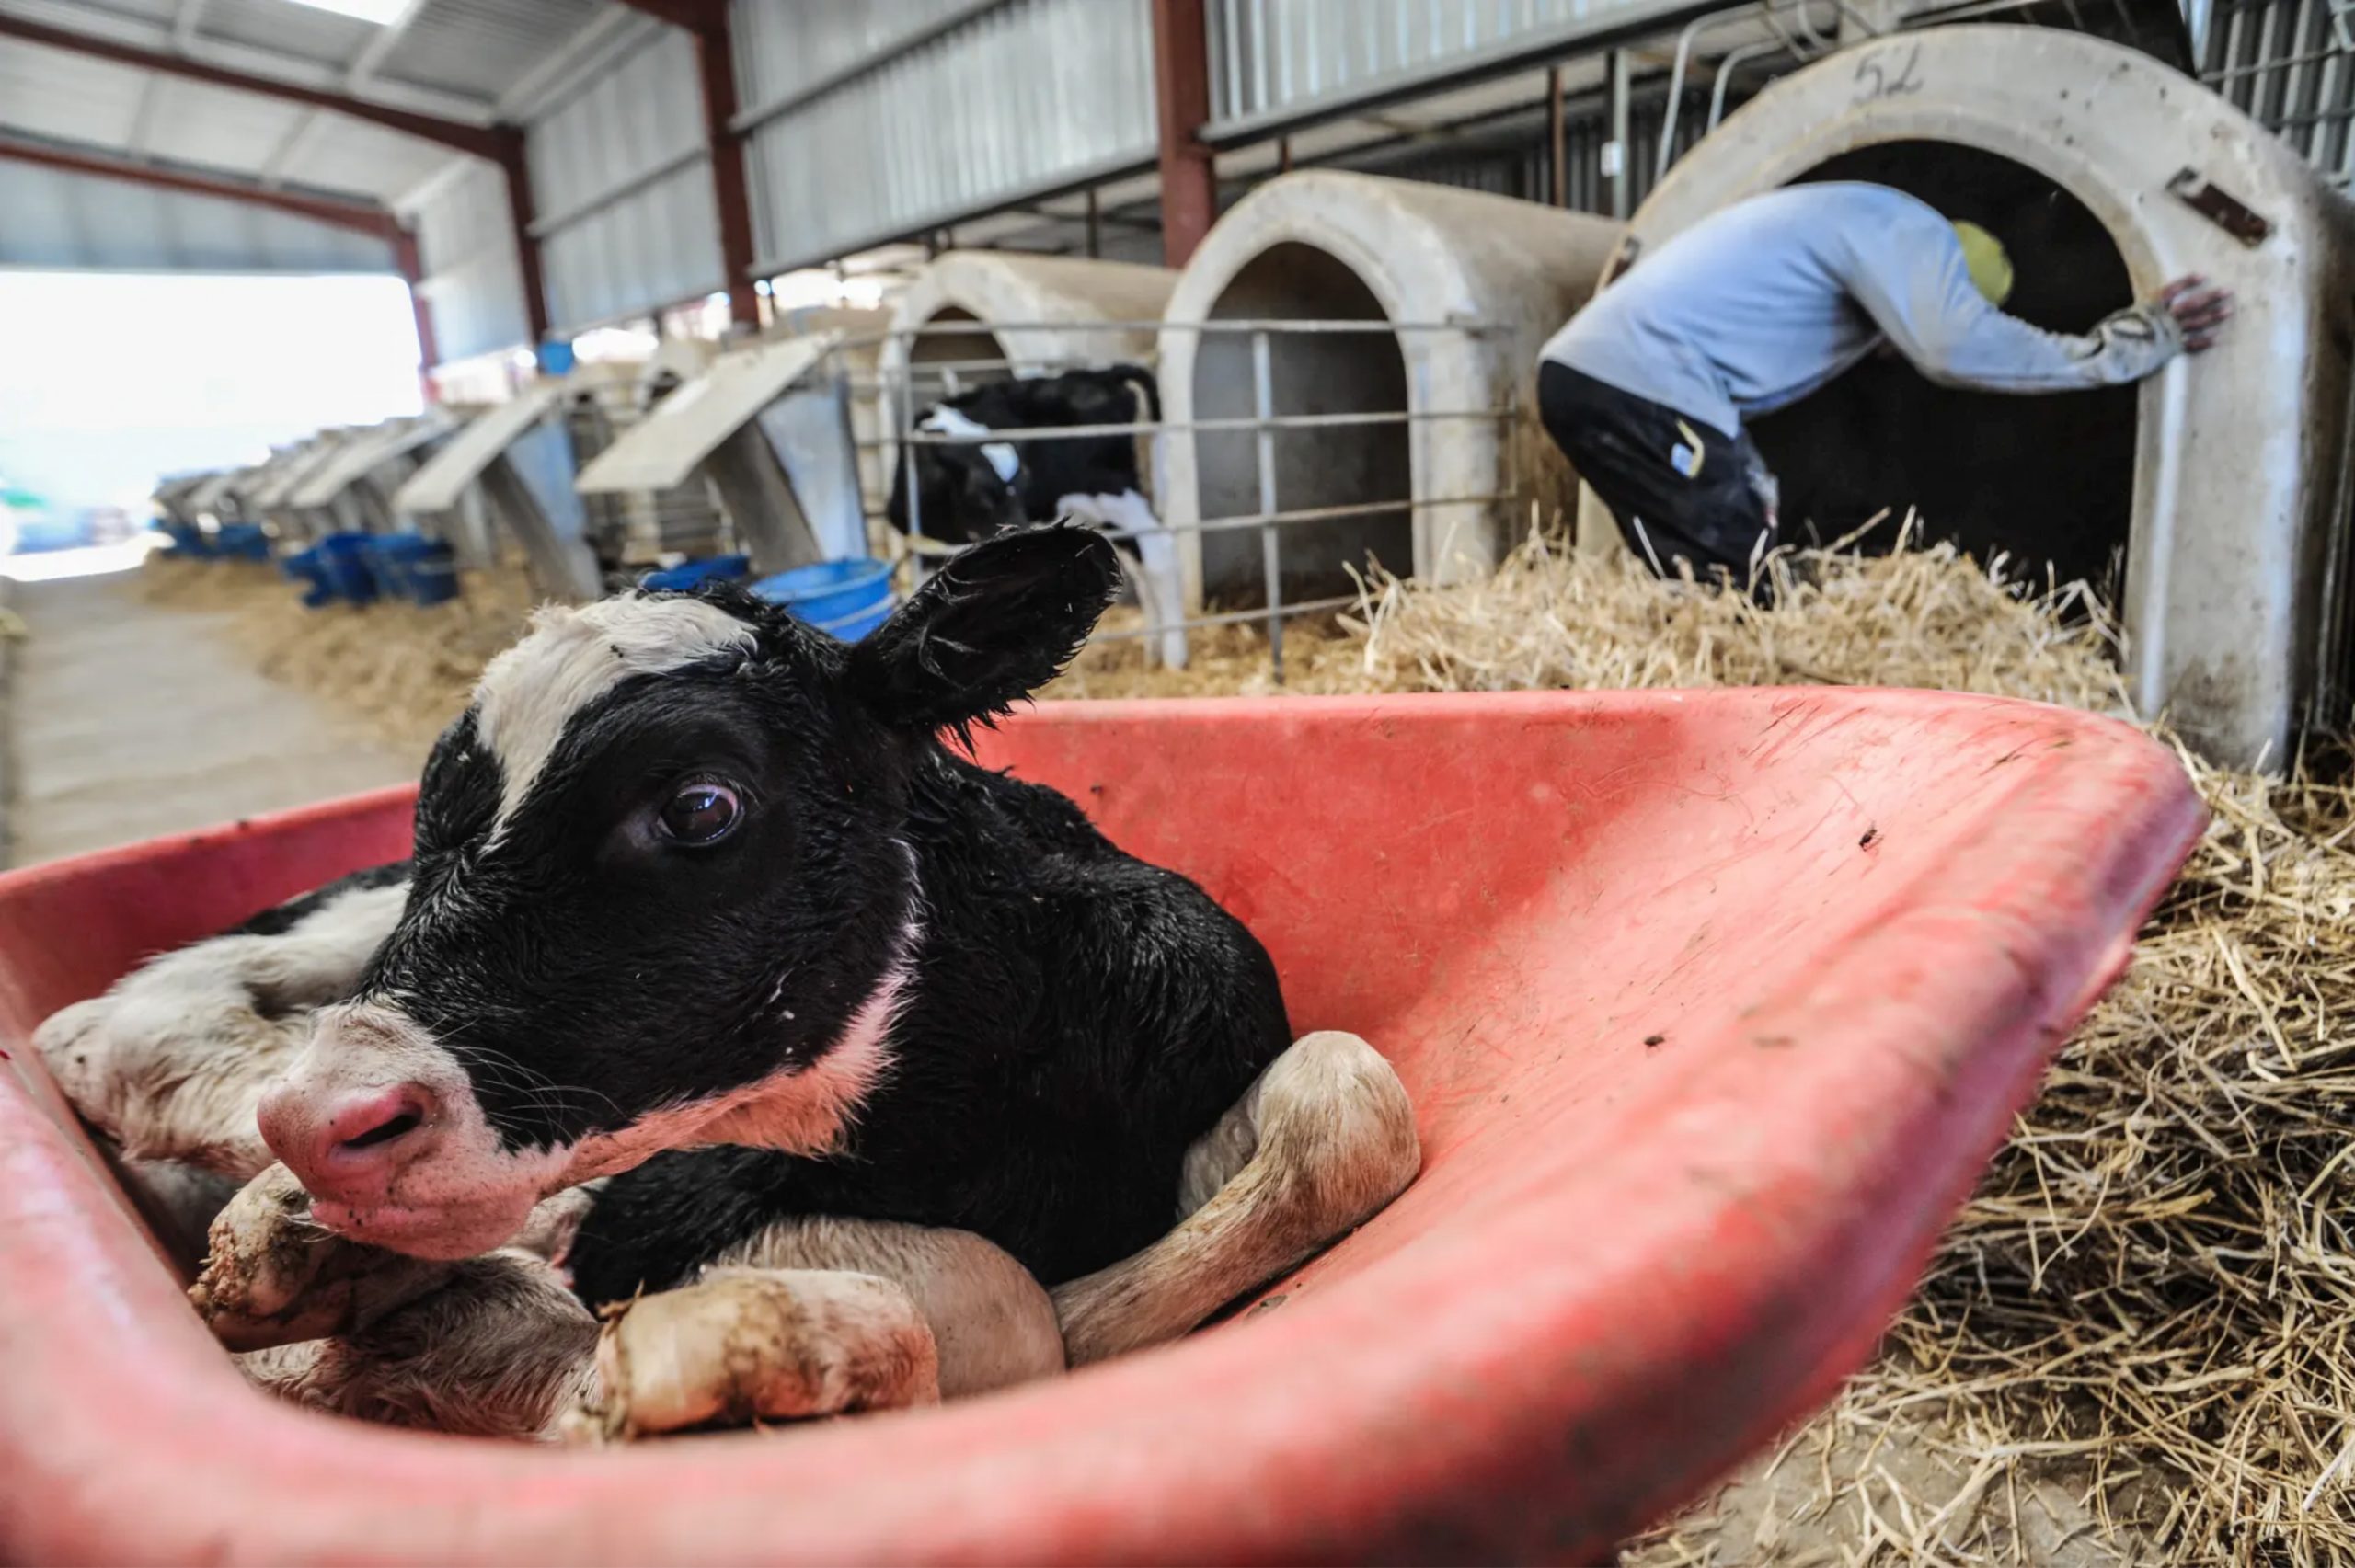 Newborn calf separated from mother at dairy farm